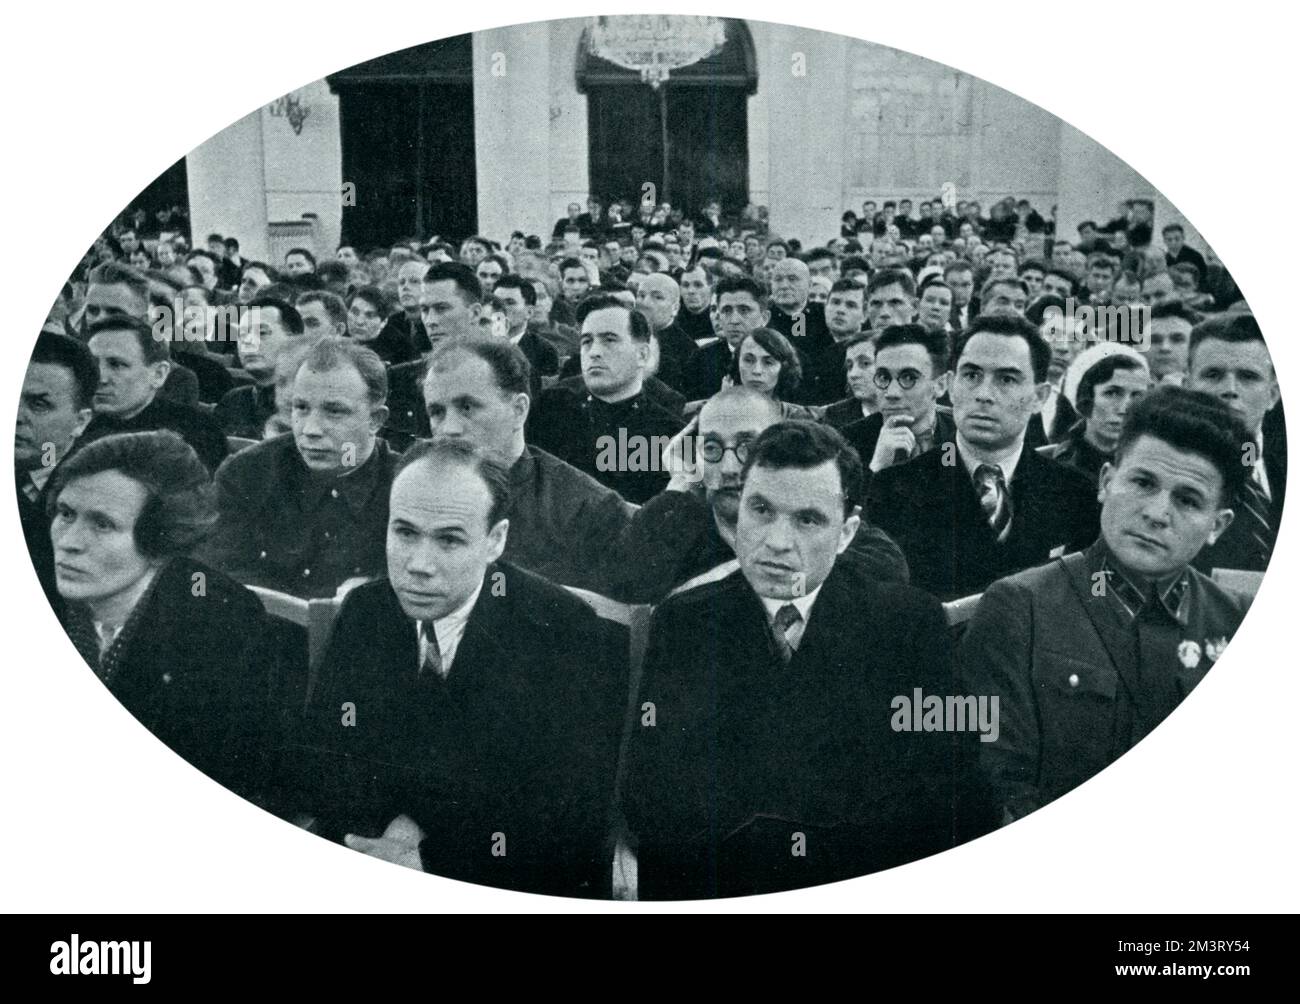 Meeting of the Communist party of the Soviet Union in Moscow. This image is part of an article titled; &quot;The Communist Friends of the Nazis&quot;, in reference to the signing of the Molotov-Ribbentrop pact in August. The Sphere remarks on the &quot;different physiognomy of Russia's new rulers&quot;.     Date: 1939 Stock Photo